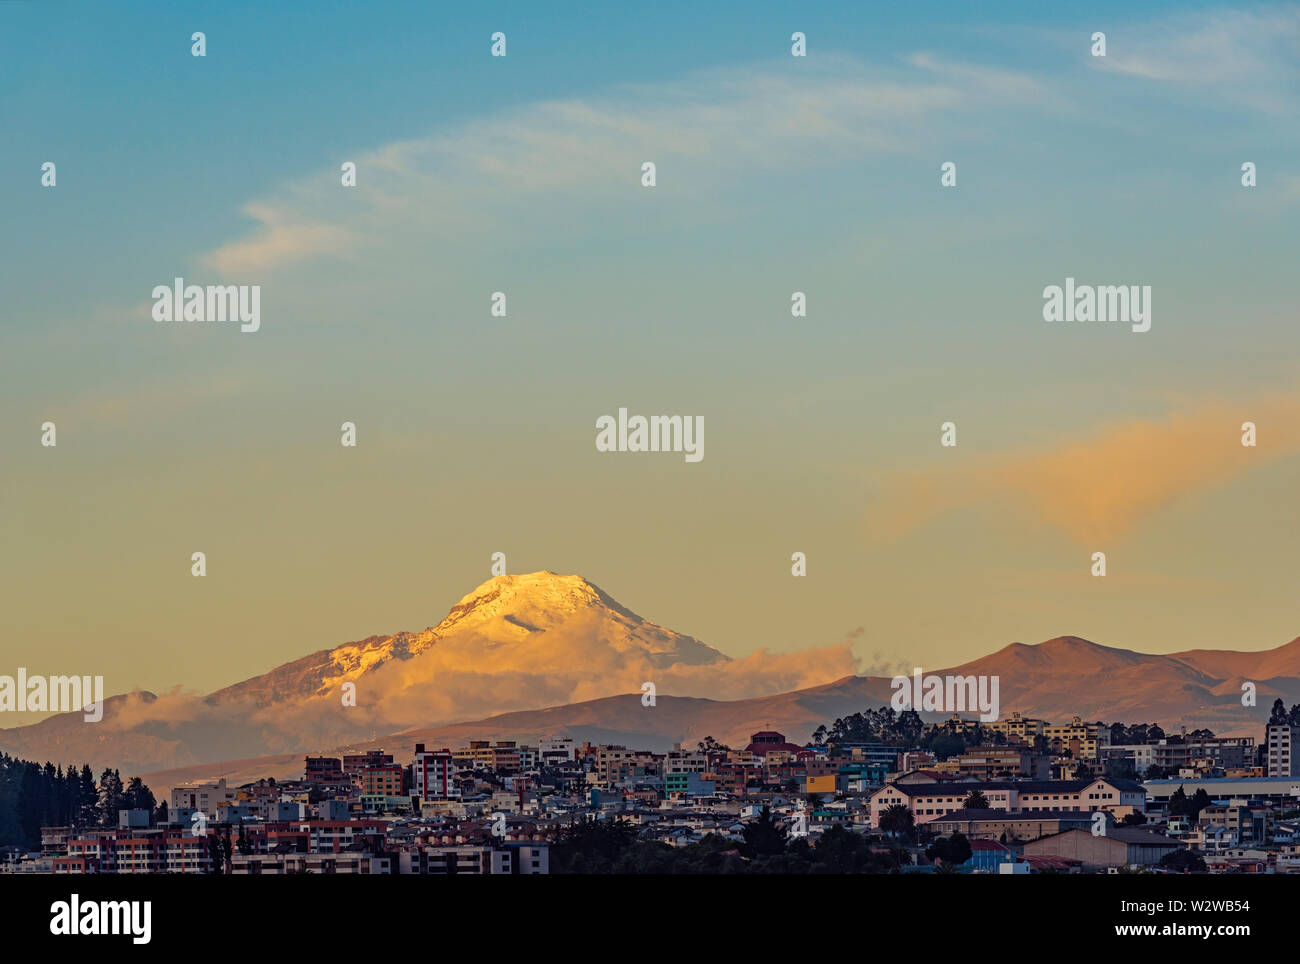 The snowcapped Andes peak of the Cayambe volcano at sunset with the urban skyline of Quito, Ecuador. Stock Photo